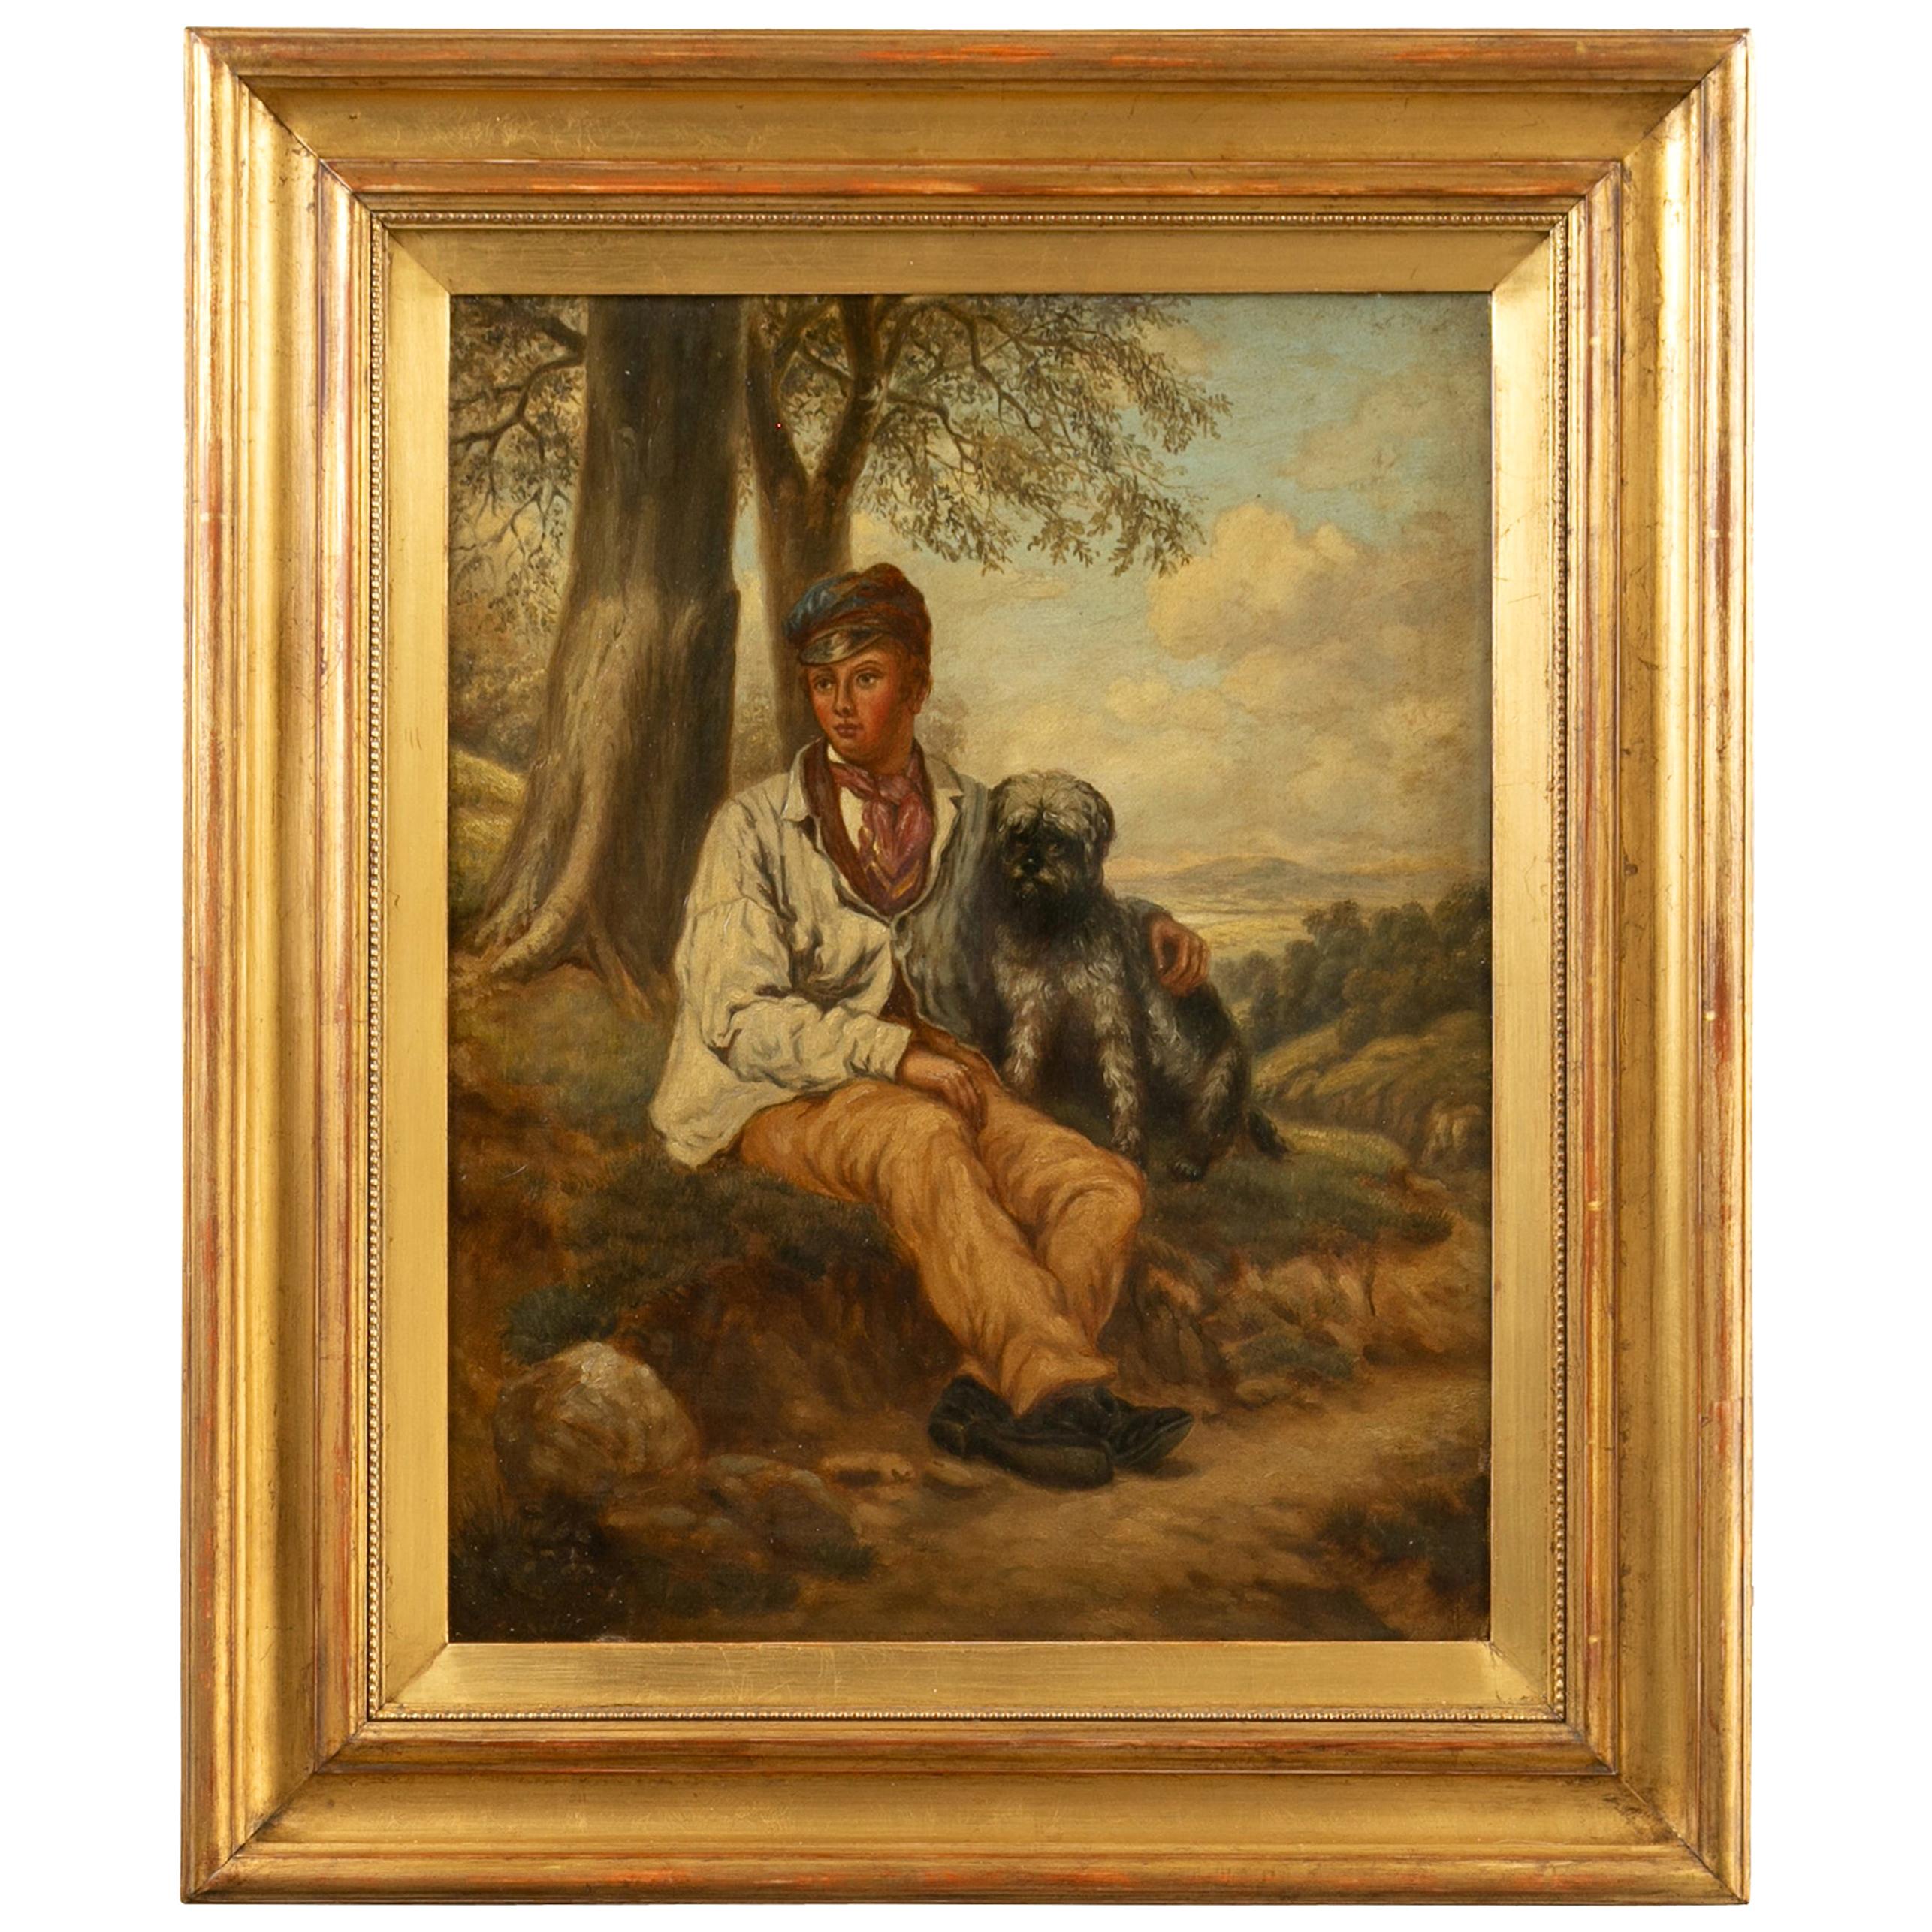 English 1880s Oil on Canvas Painting of a Boy with His Dog in Antique Gilt Frame For Sale